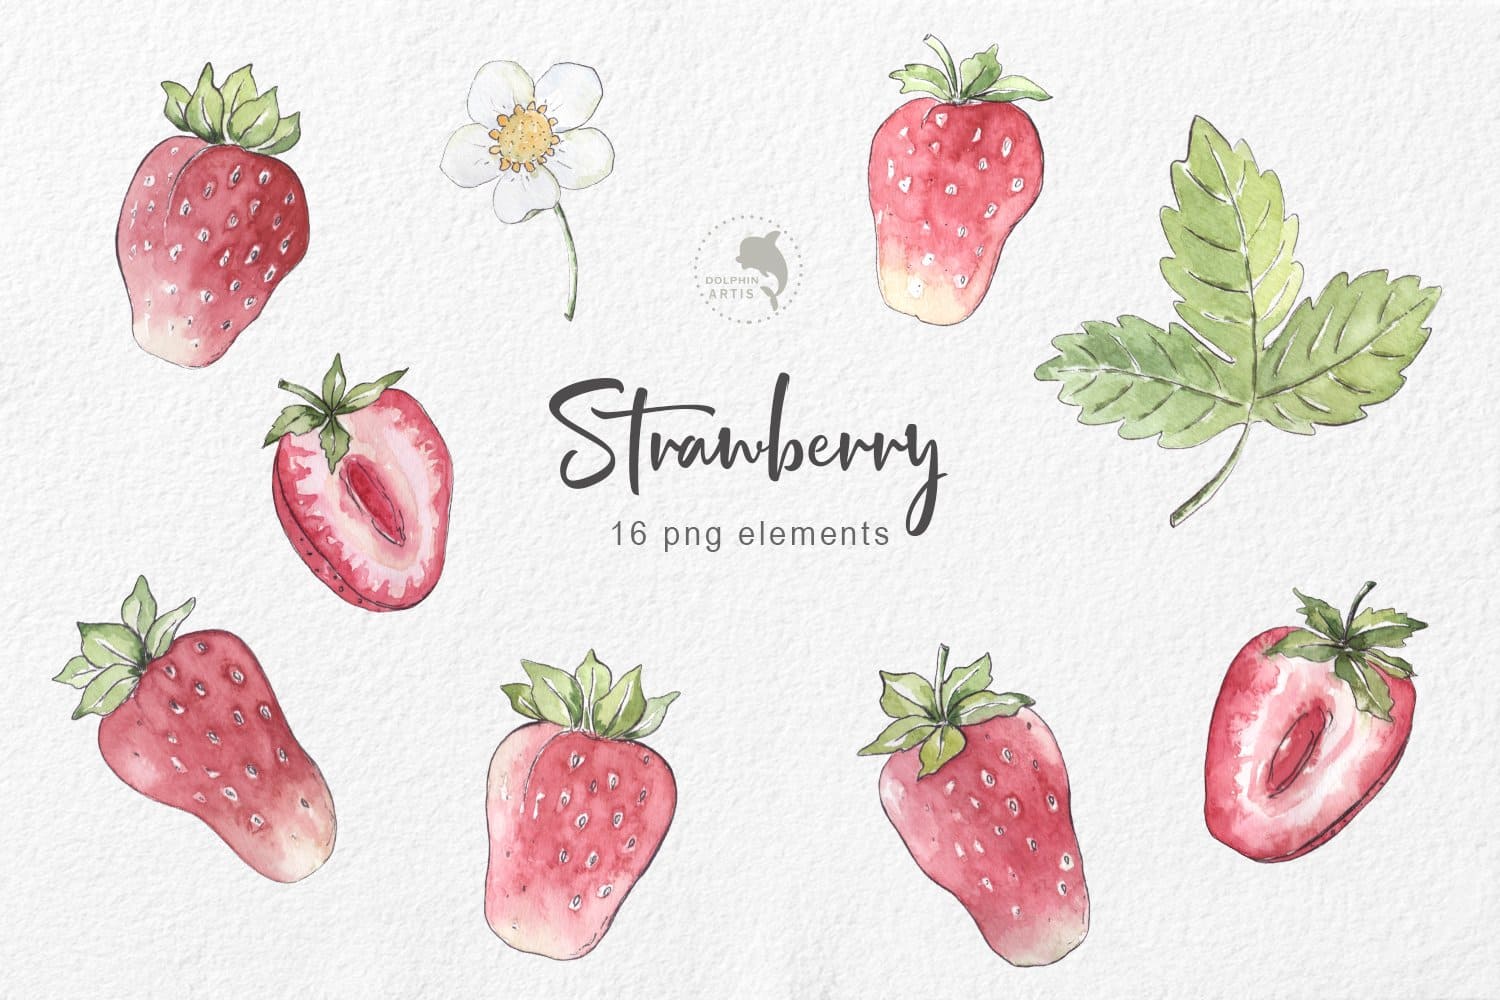 Watercolor image of whole and cut strawberries.